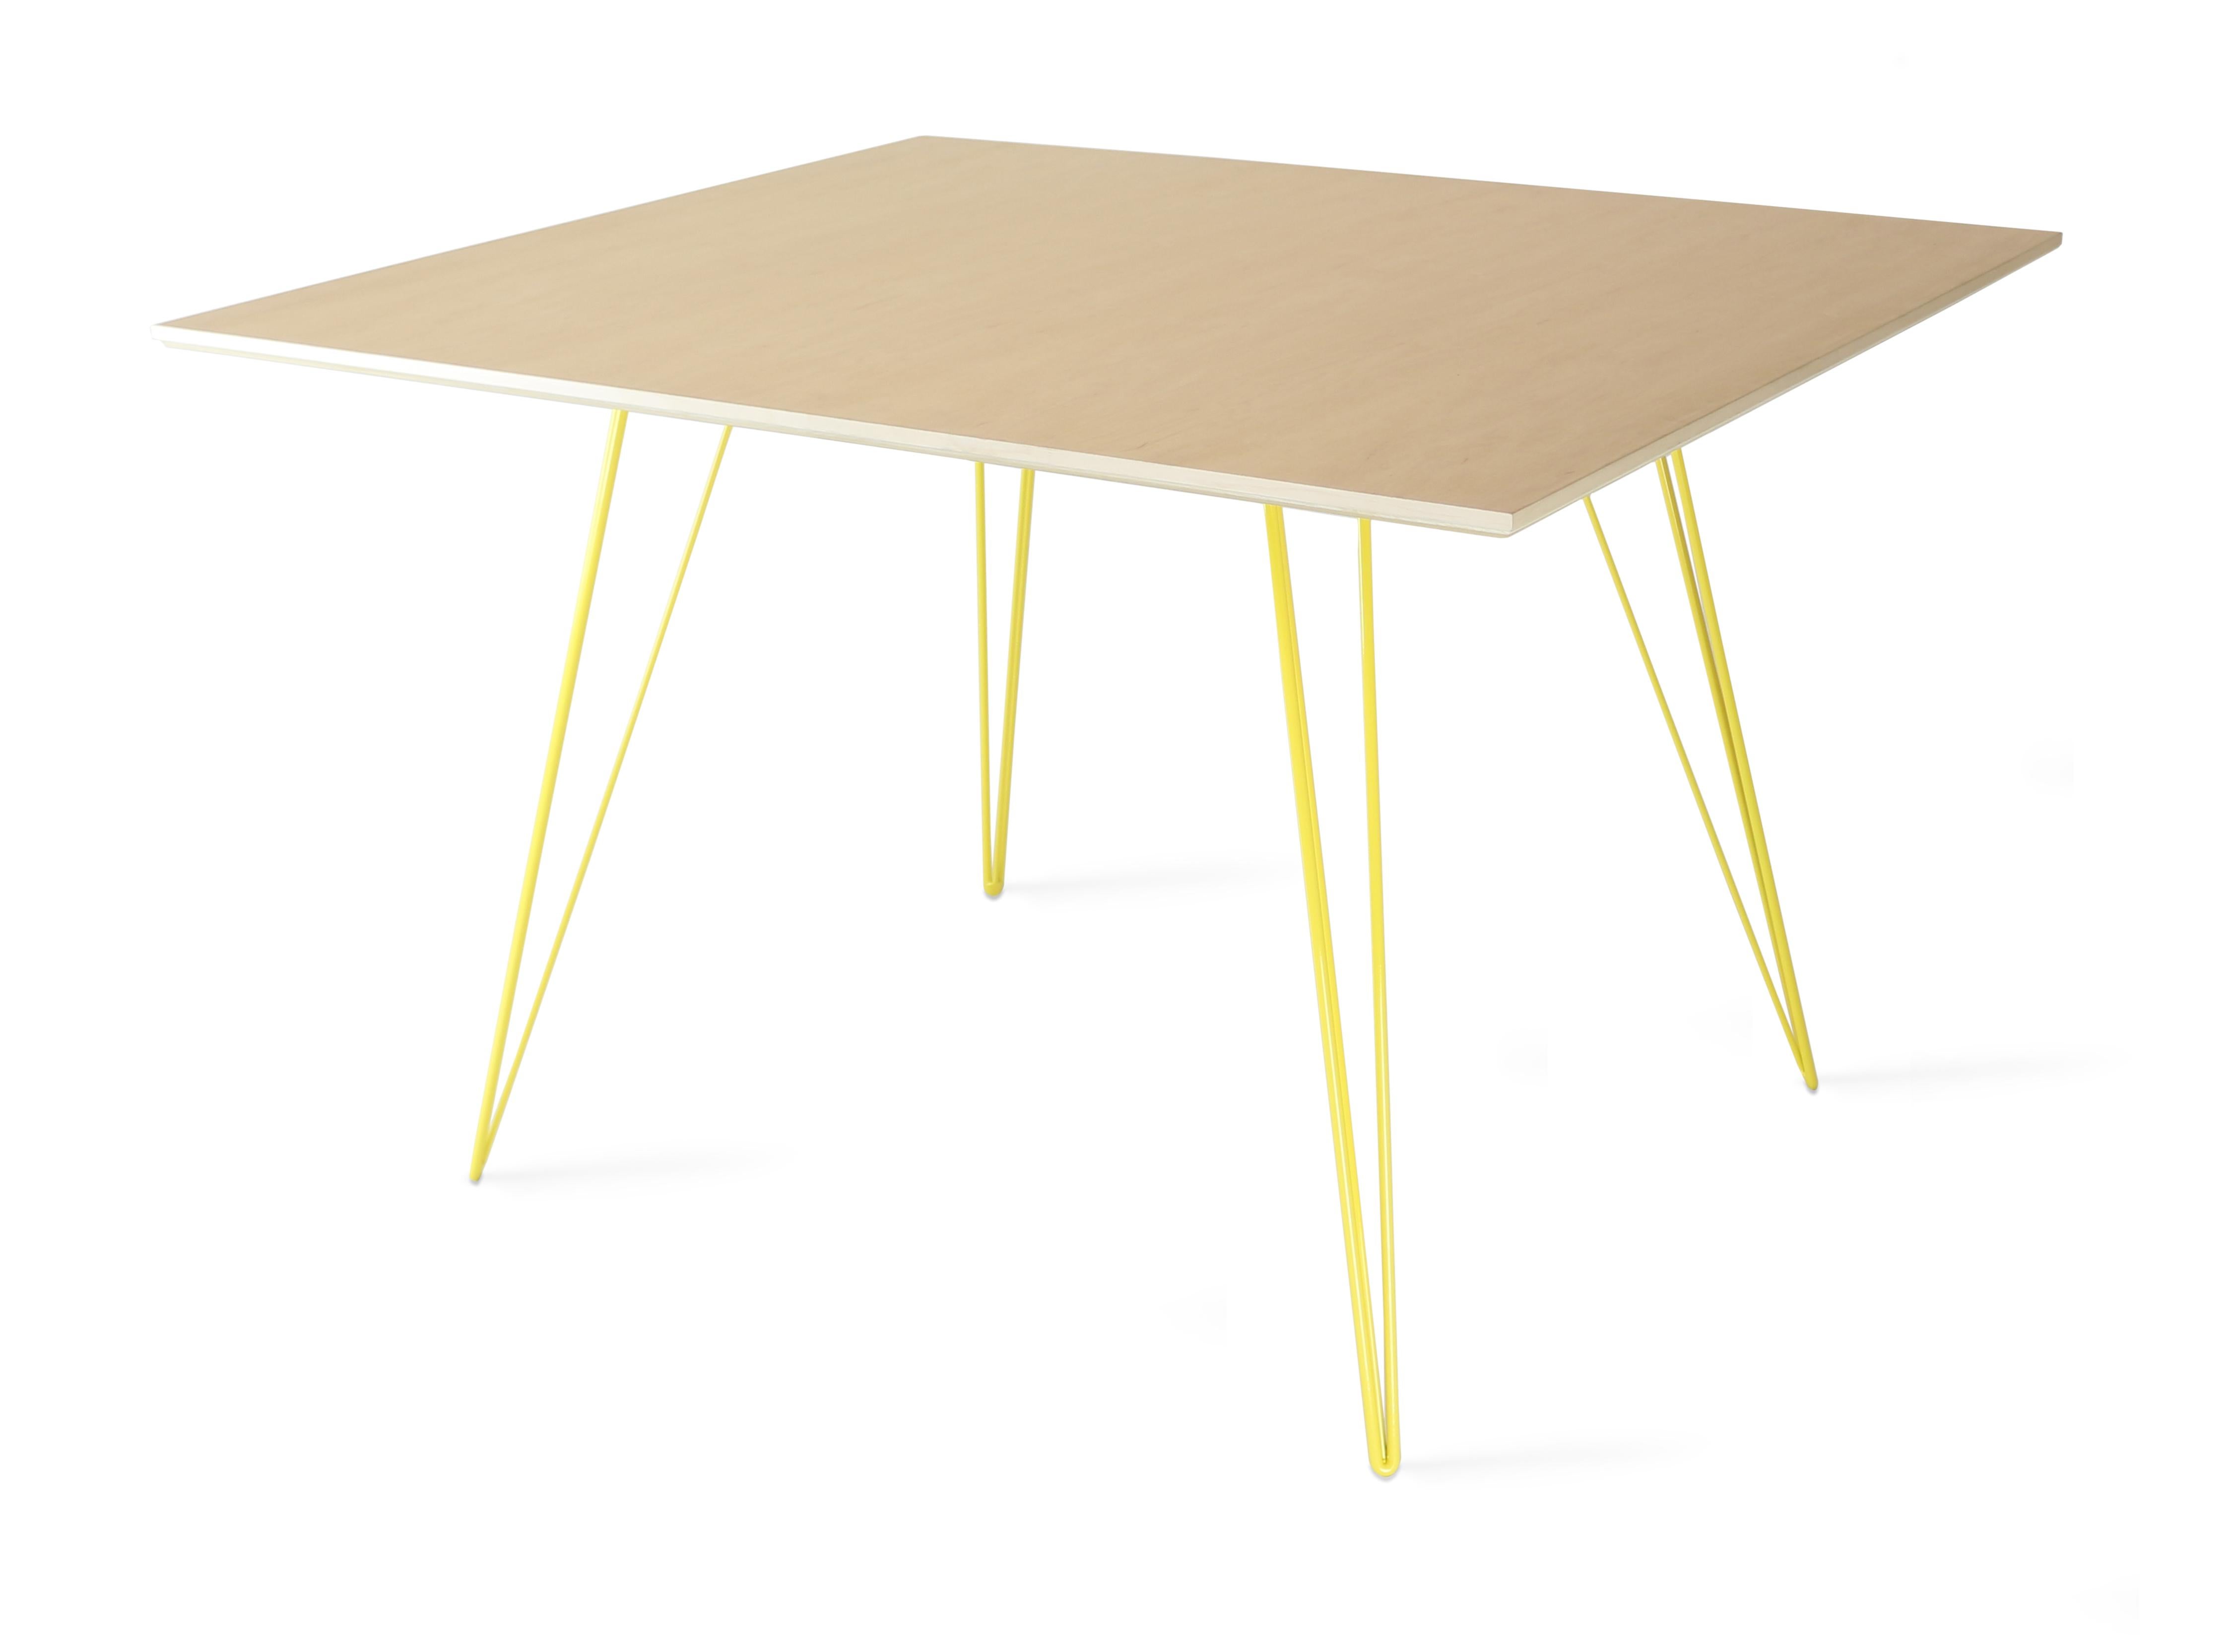 A thin, elegant and light Maple table that can be customized to any shape, size and color desired. This handcrafted item perfectly blends industrial yellow hairpin legs with a beveled wooden top. The irregular beauty of its natural wood combined